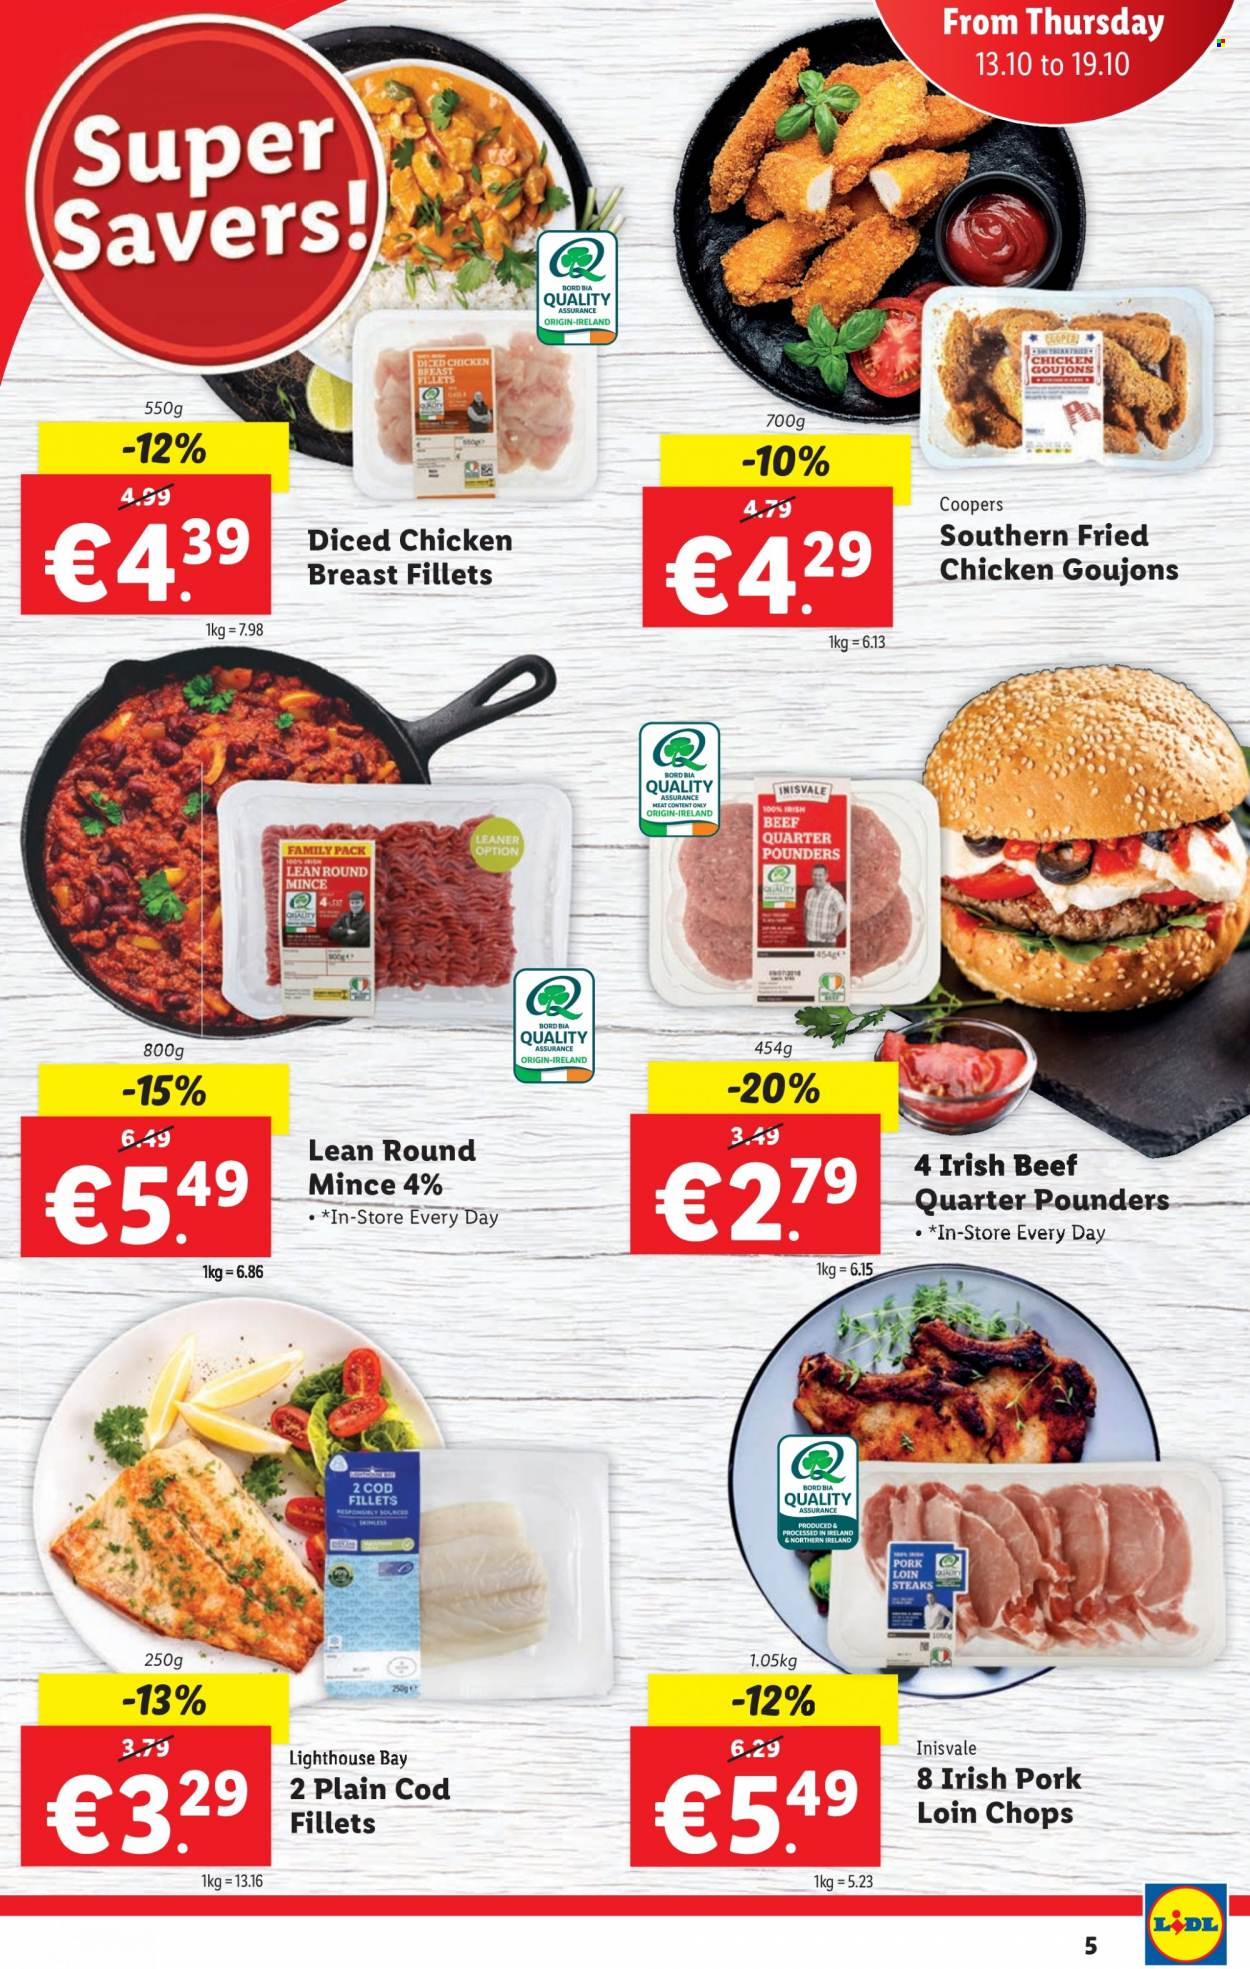 thumbnail - Lidl offer  - 13.10.2022 - 19.10.2022 - Sales products - cod, fried chicken, chicken breasts, steak, pork chops, pork loin, pork meat, Cooper. Page 5.